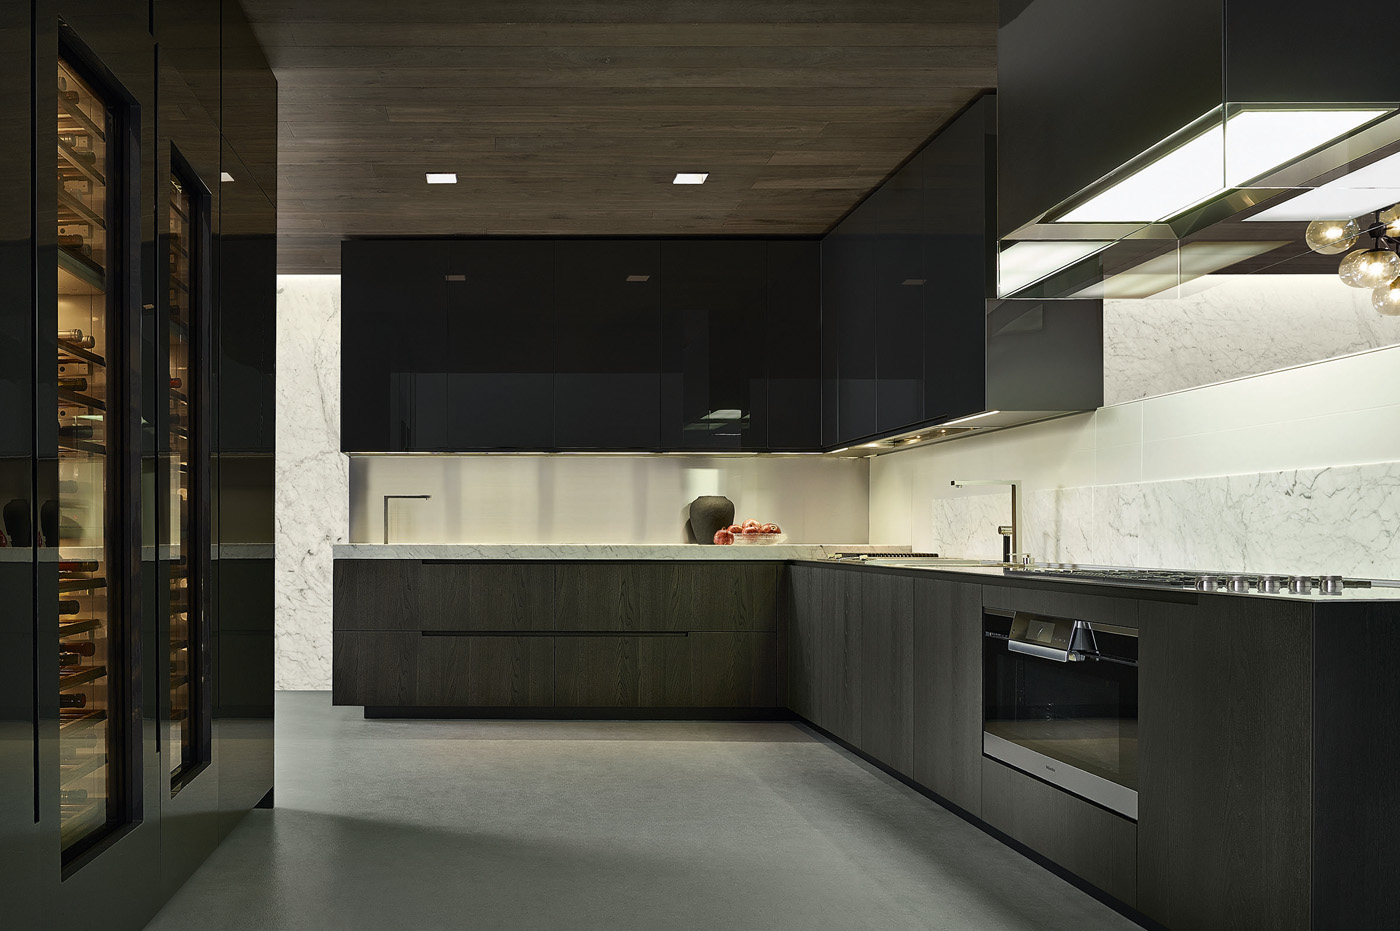 Studio Italia's Joanna Hoeft will talk our Kitchen Day 2015 guests through the latest Varenna kitchens and new developments in countertops and appliances. 